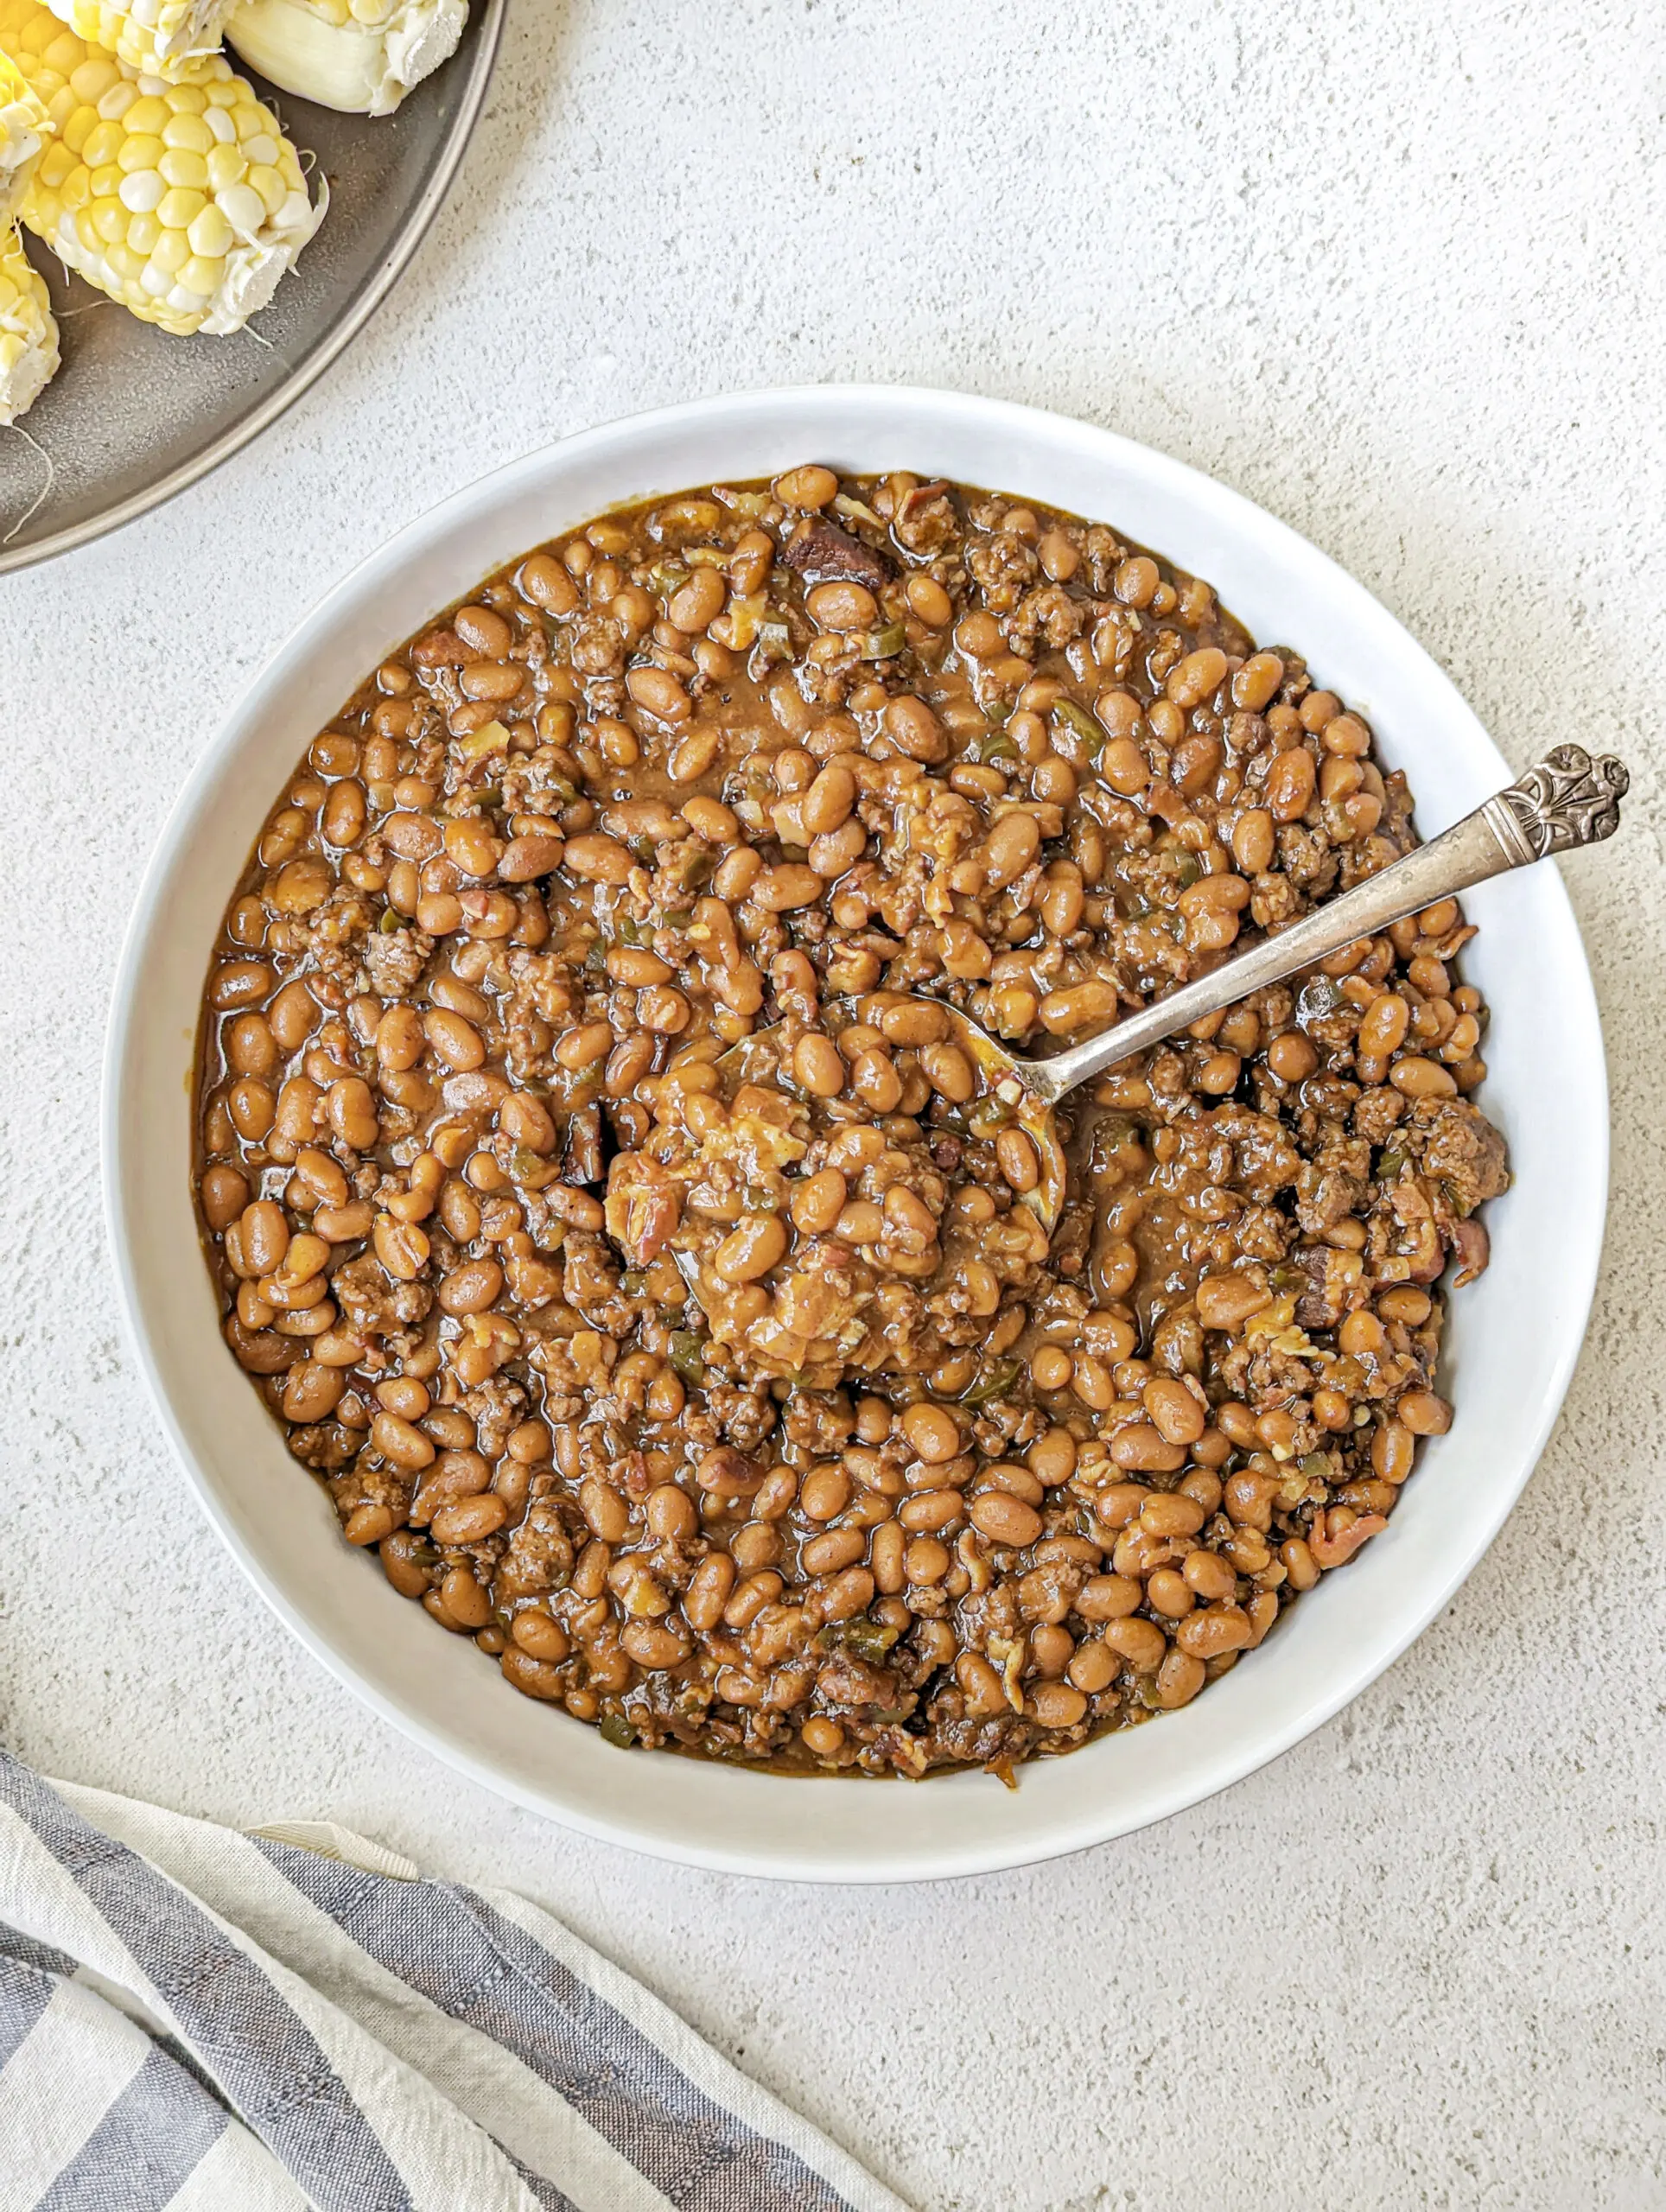 A serving bowl of baked beans with corn on the cob in the background.